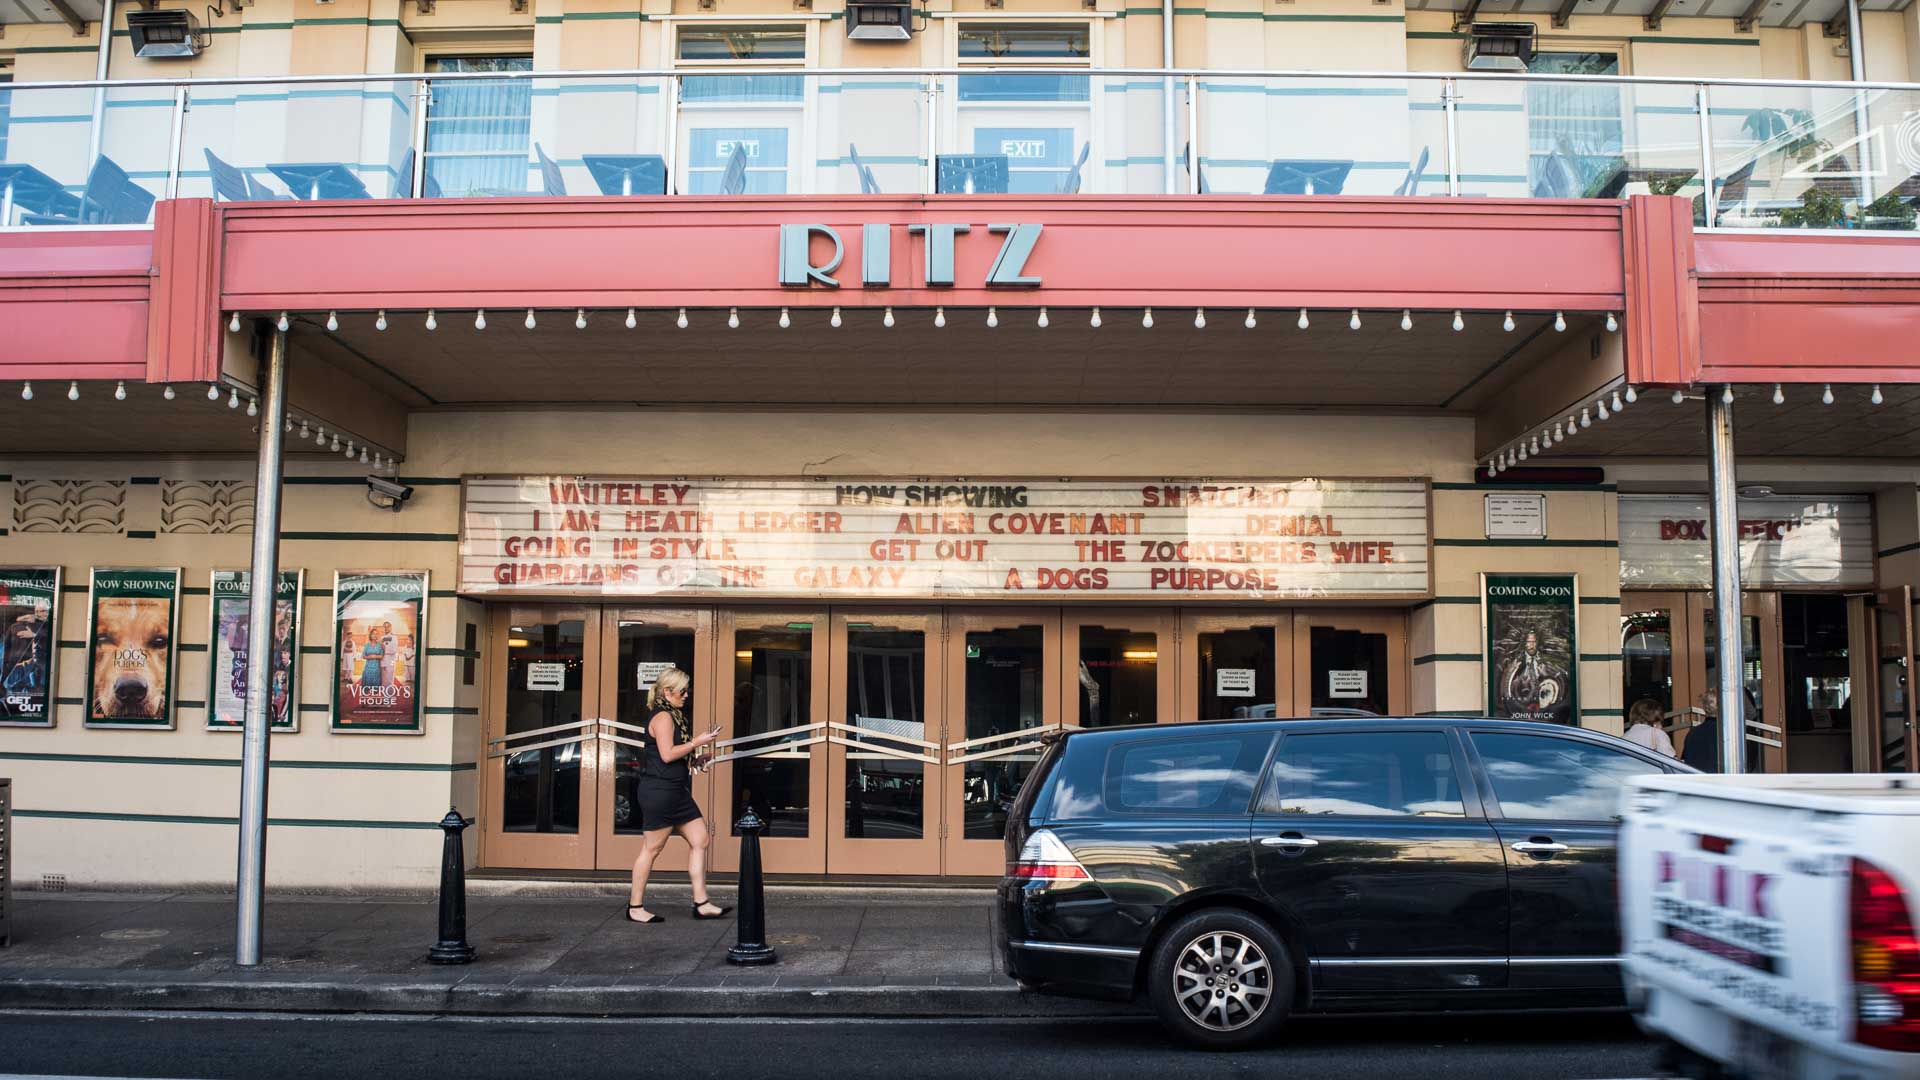 A Movie Night at The Ritz